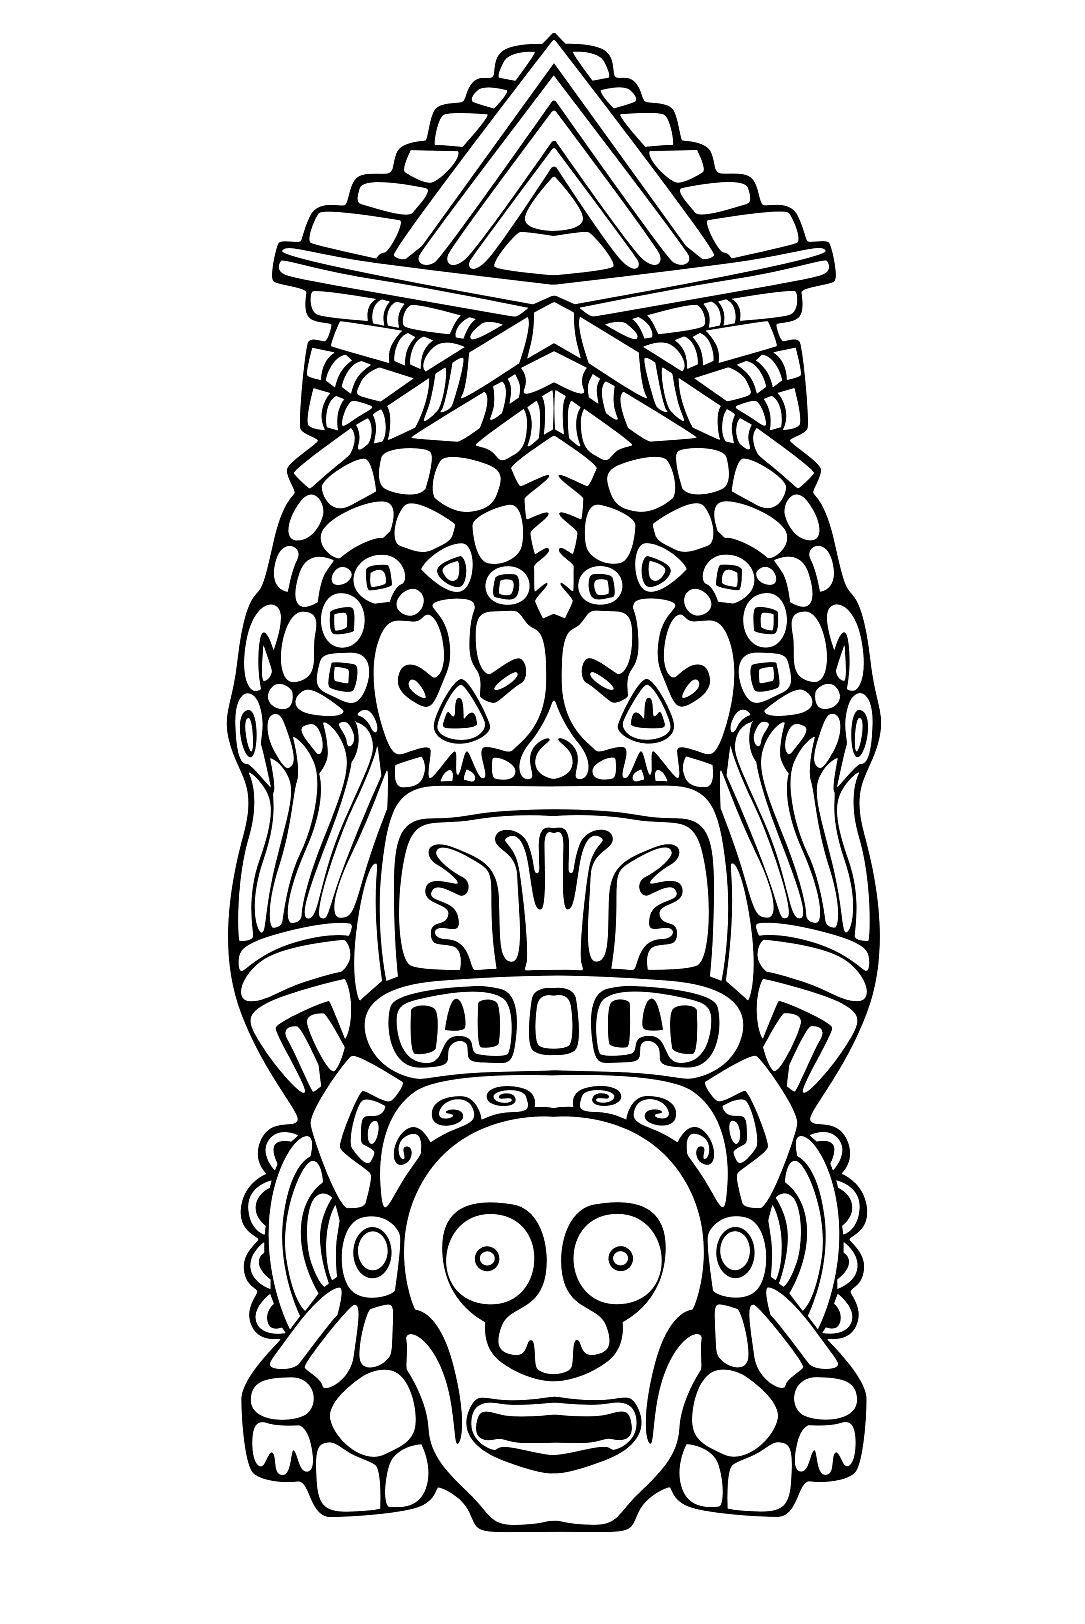 Totem inspired by Aztecs